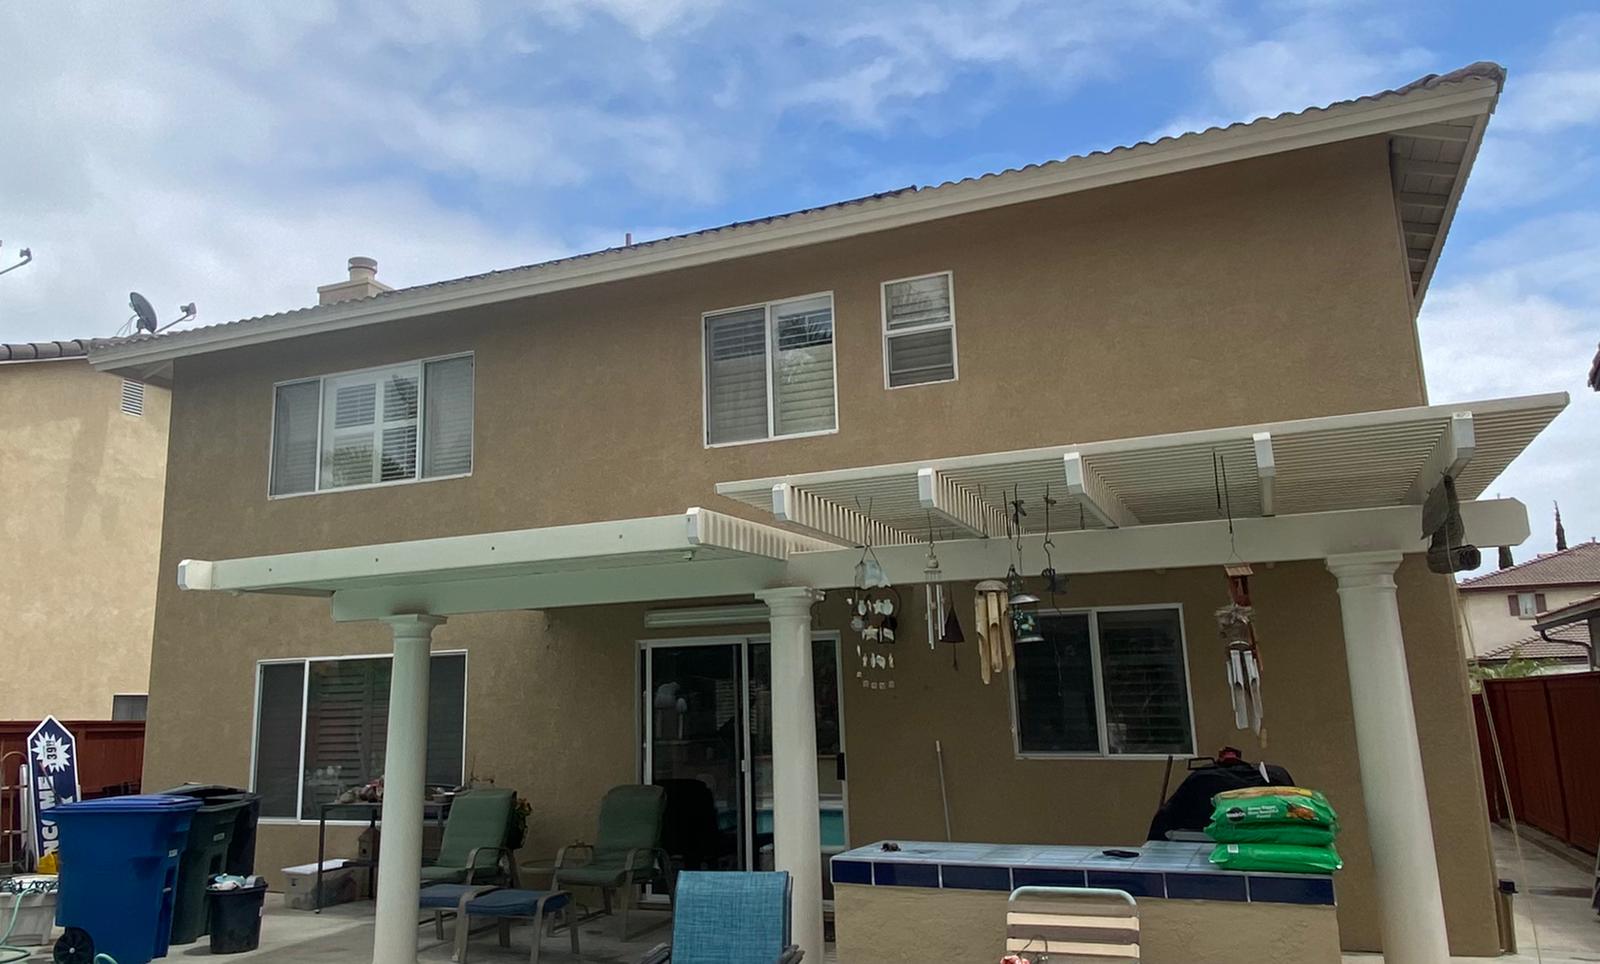 House Painting in Chula Vista